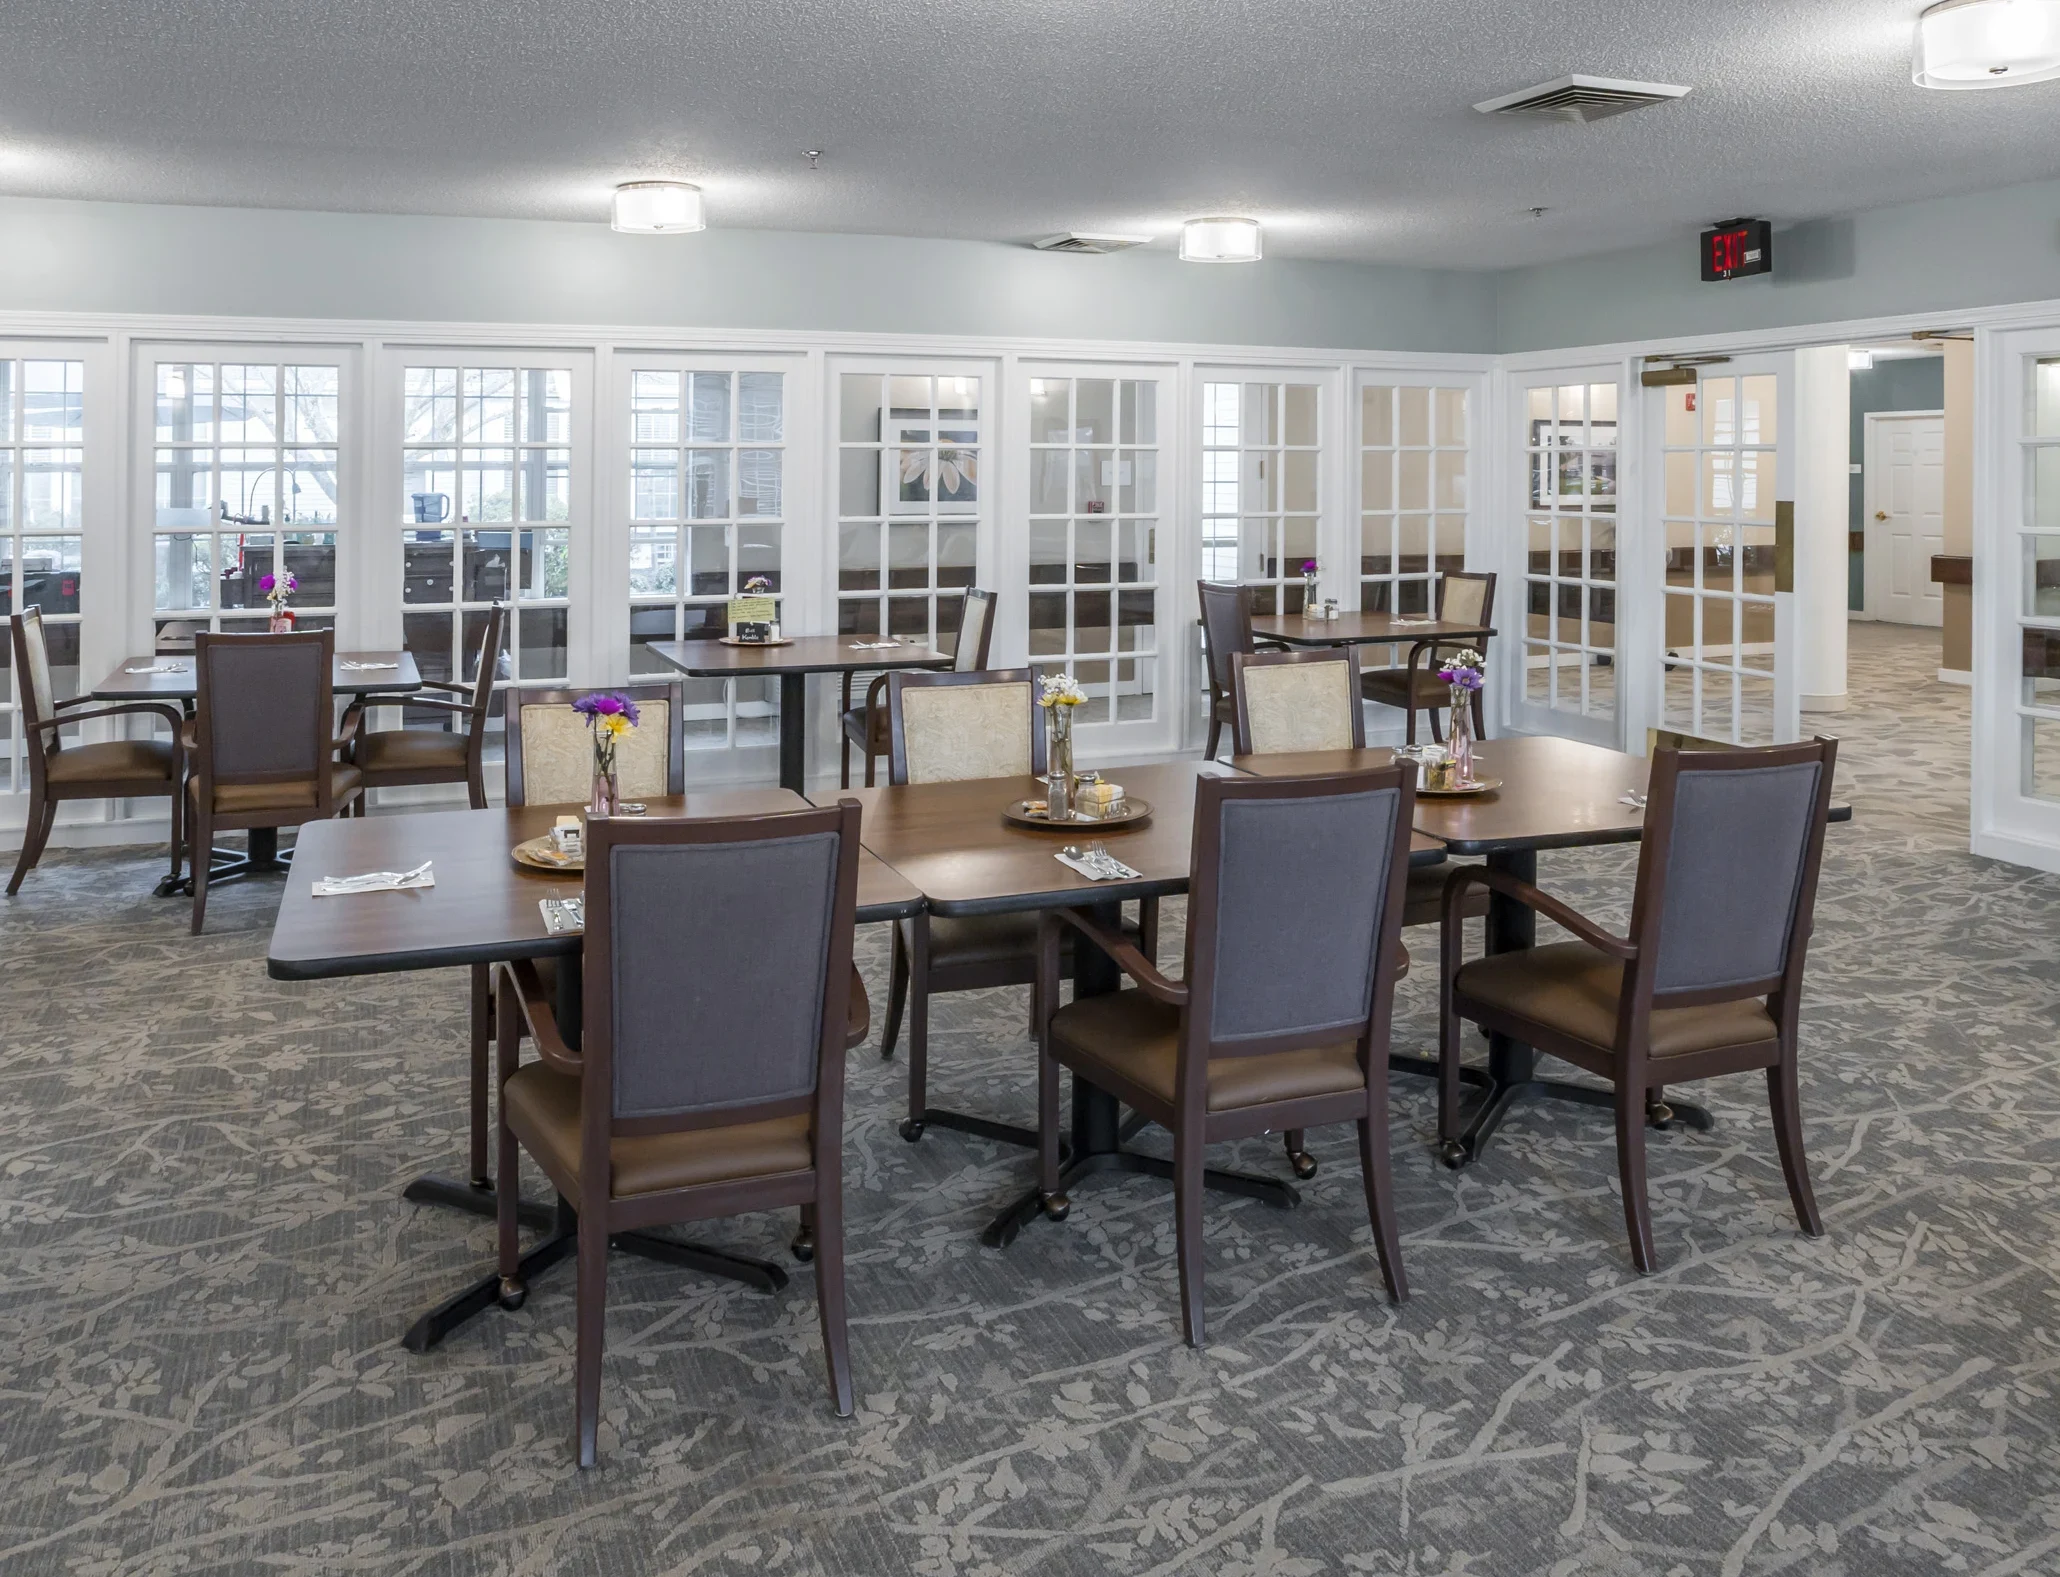 Dining room at American House Kingsport, a retirement home in Kingsport, TN